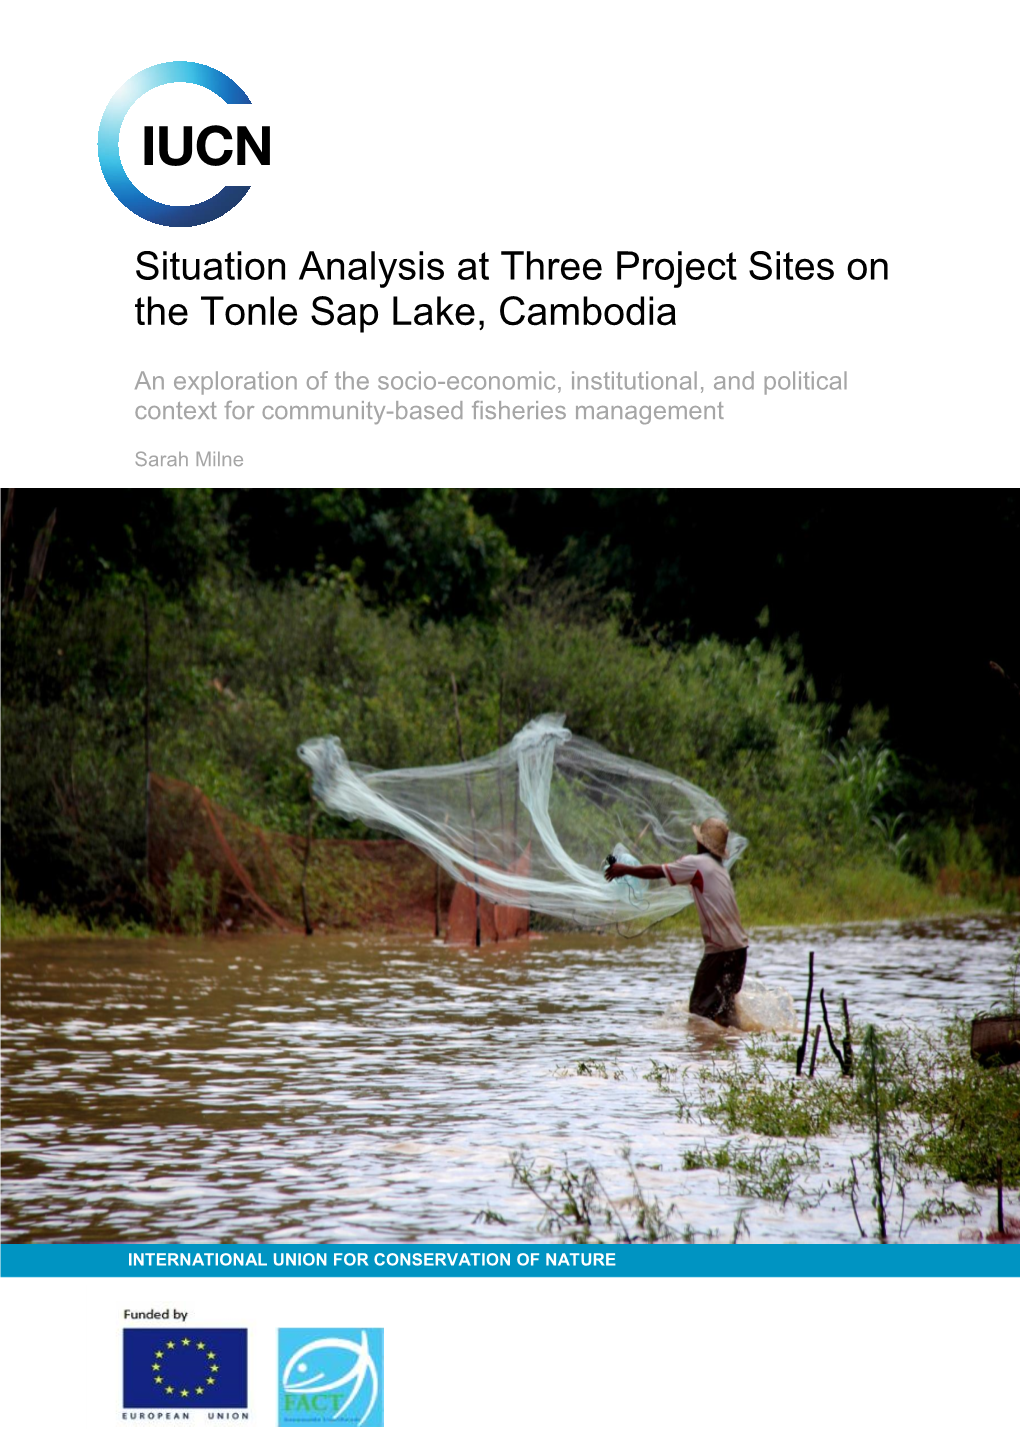 Situation Analysis at Three Project Sites on the Tonle Sap Lake, Cambodia